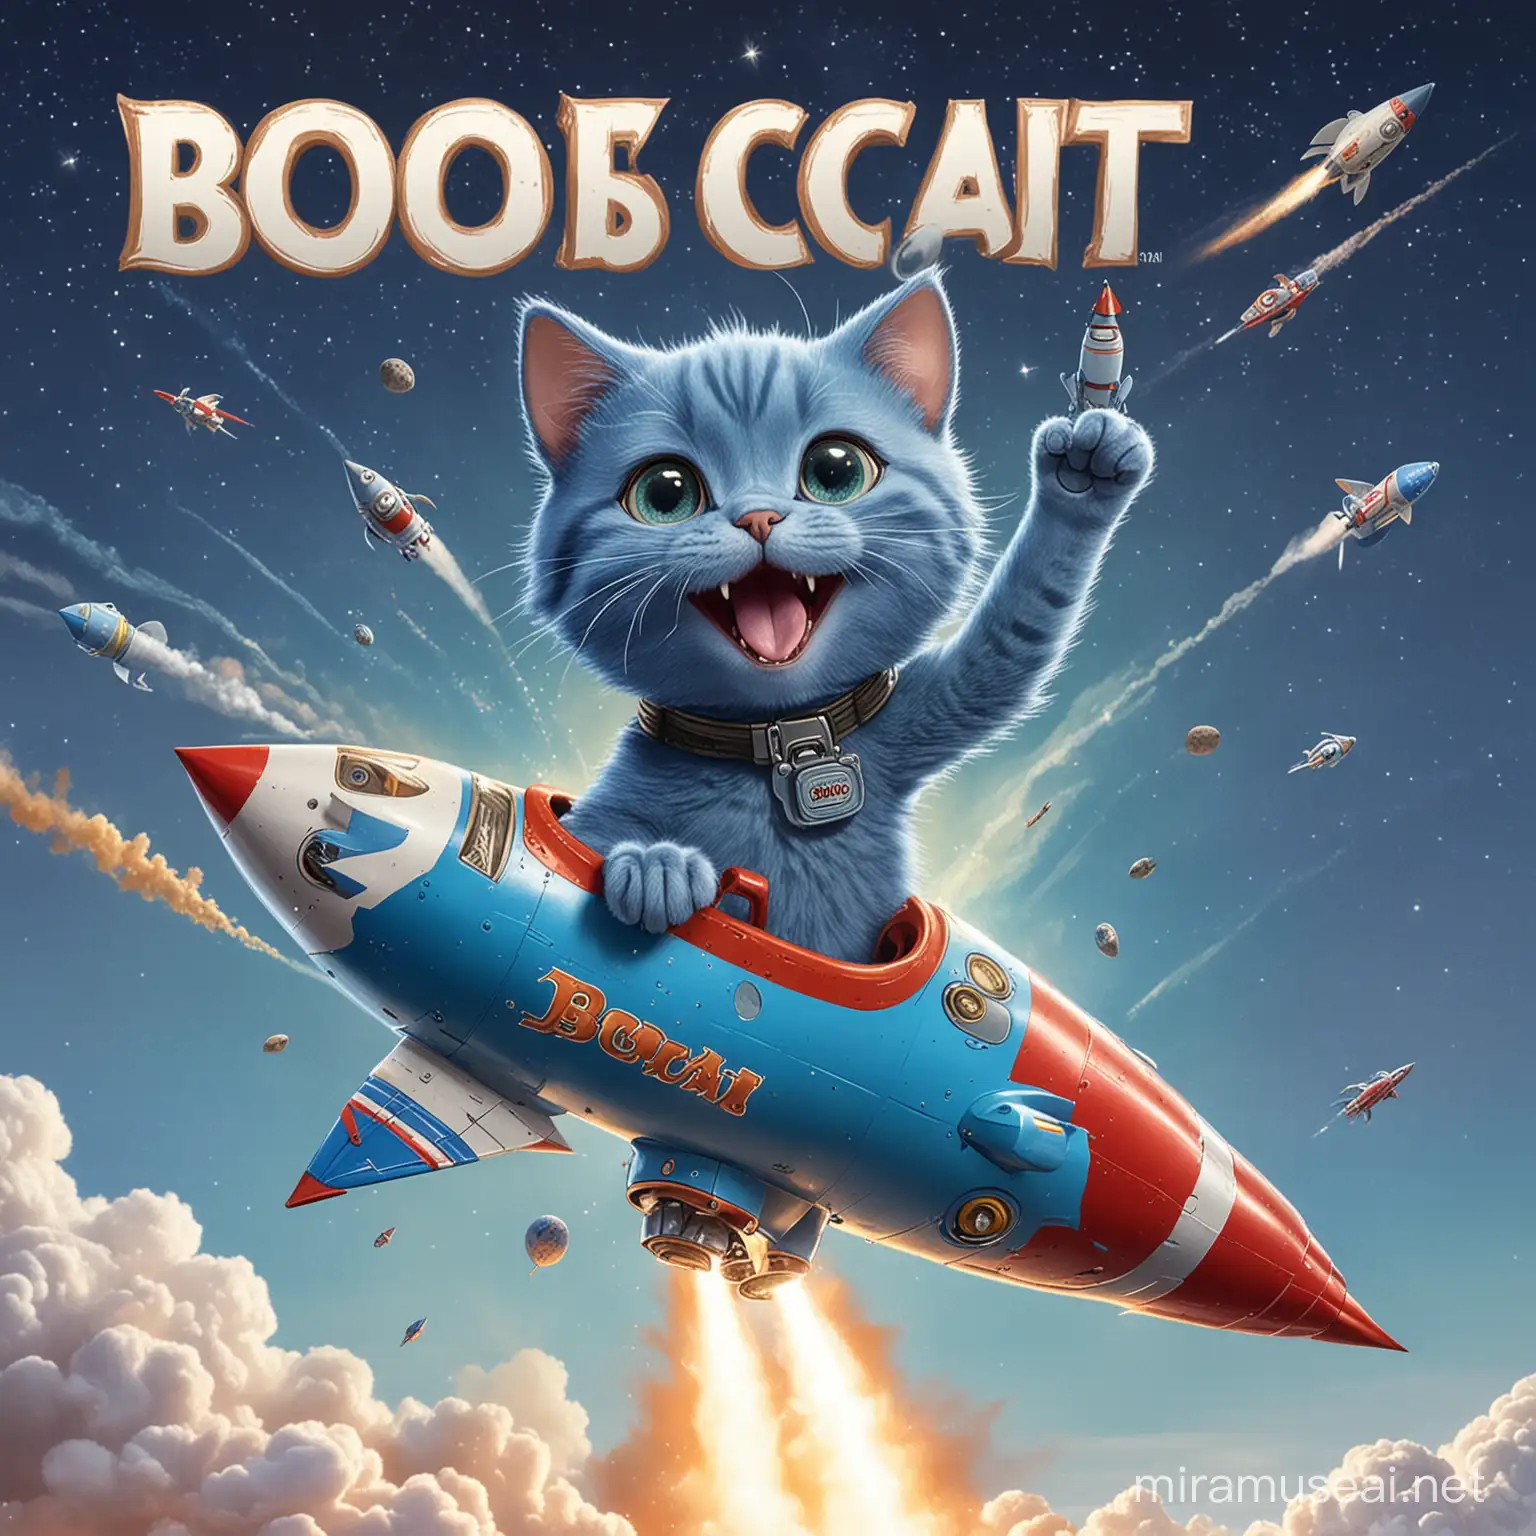 A BLUE CAT WITH THE NAME BOB CAT, STICKING OUT IS TONGUE WHILE RIDING A ROCKET
